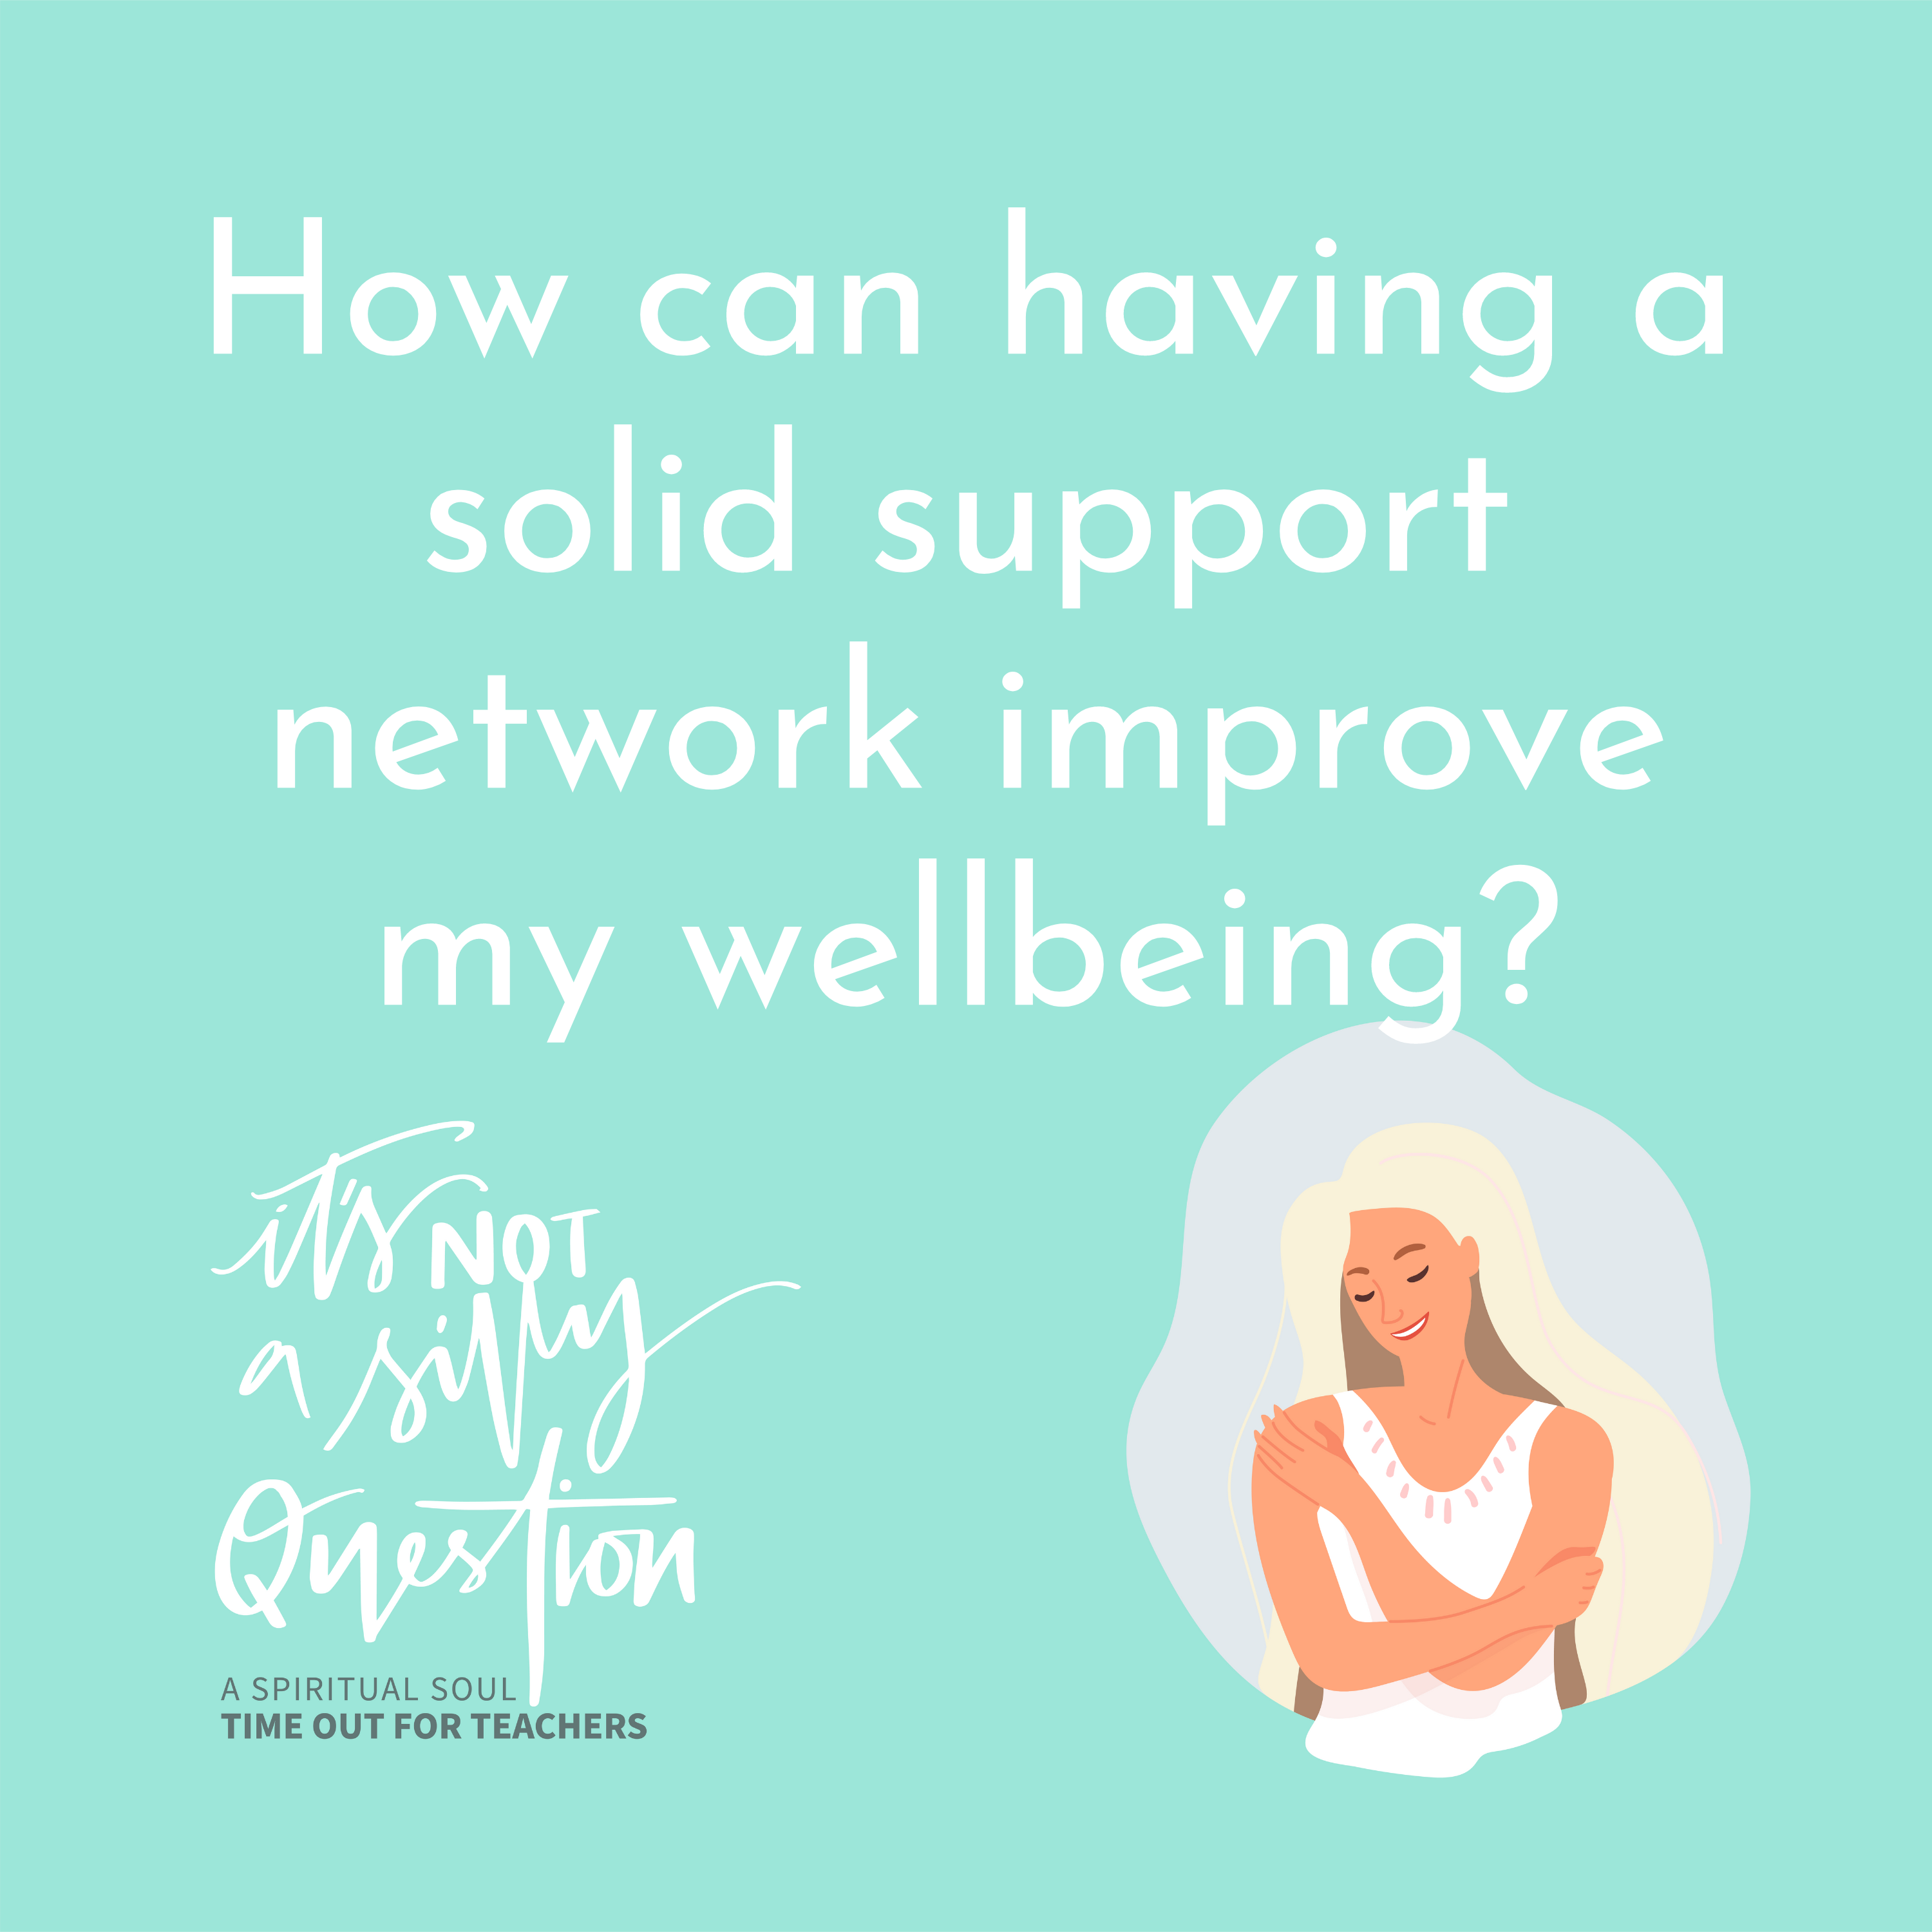 How can having a solid support network help improve my wellbeing?